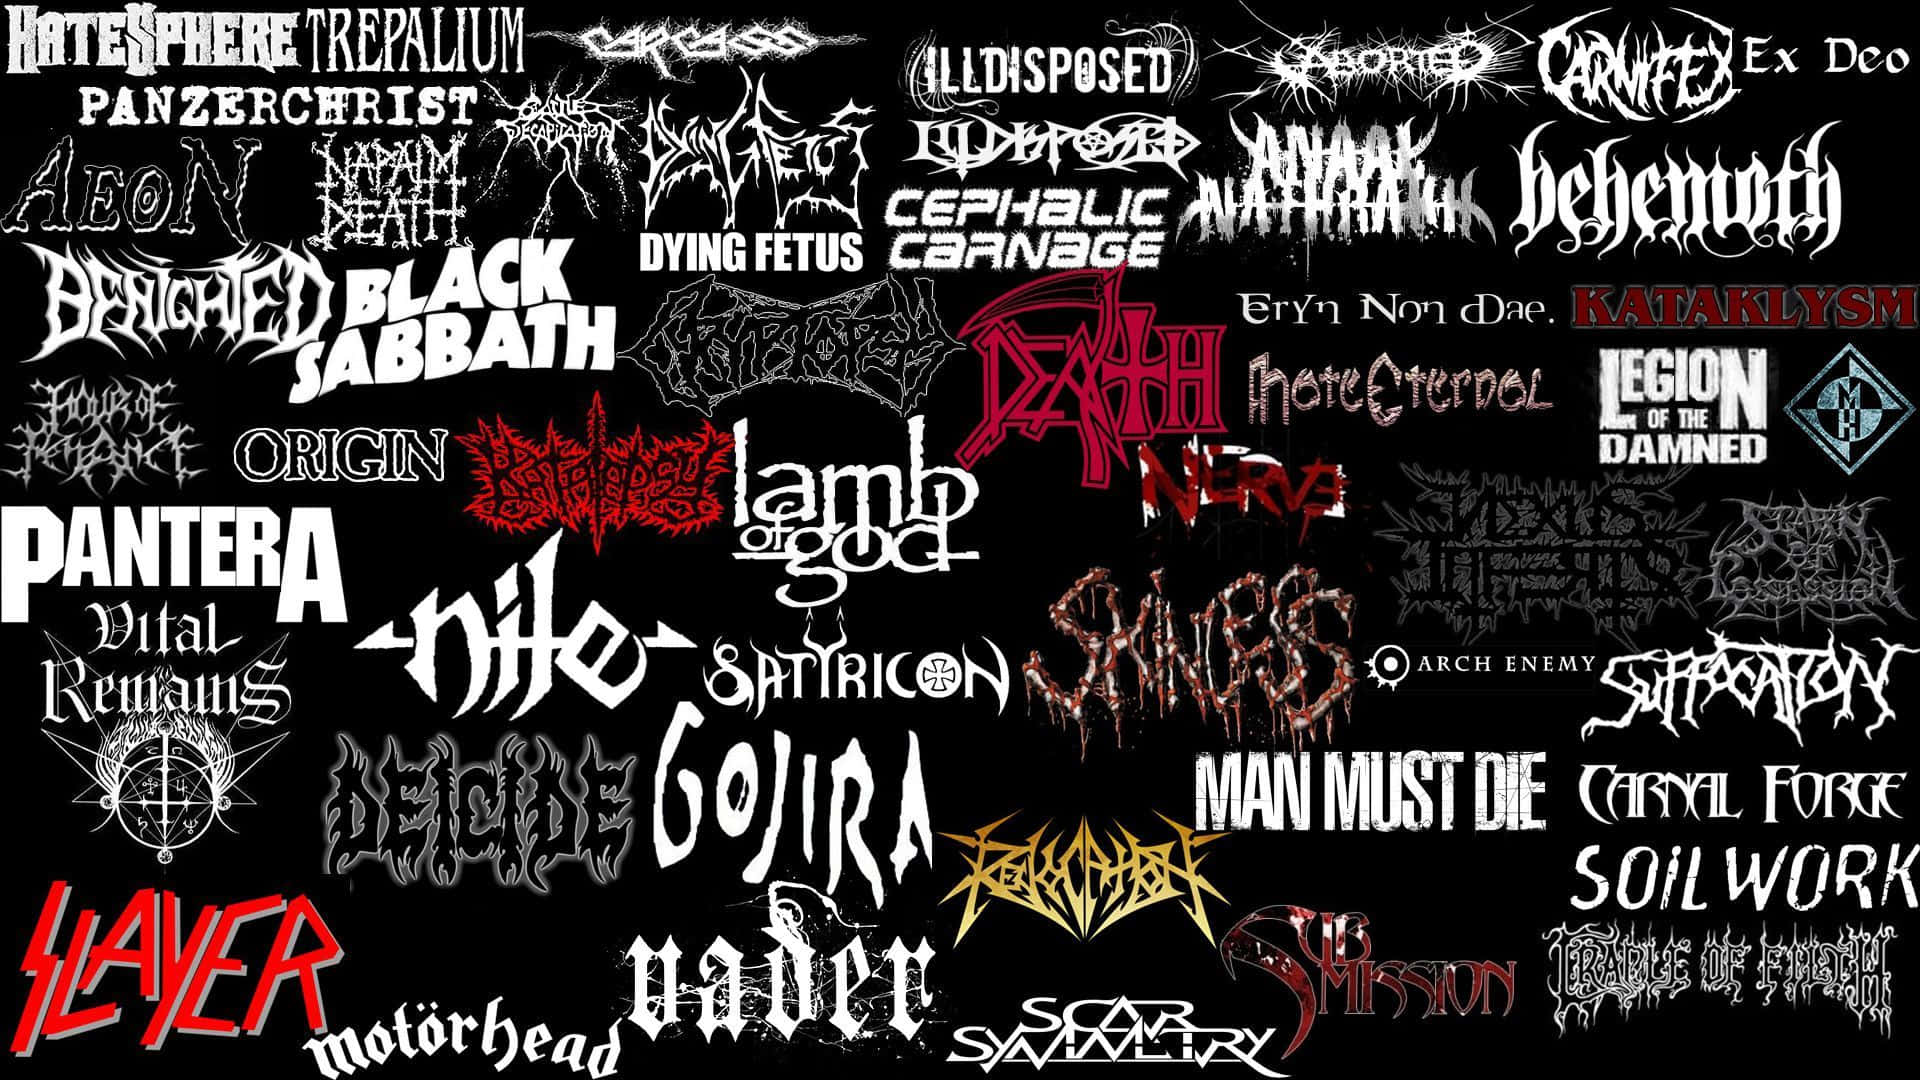 Raise your horns and rock out with heavy metal music!" Wallpaper